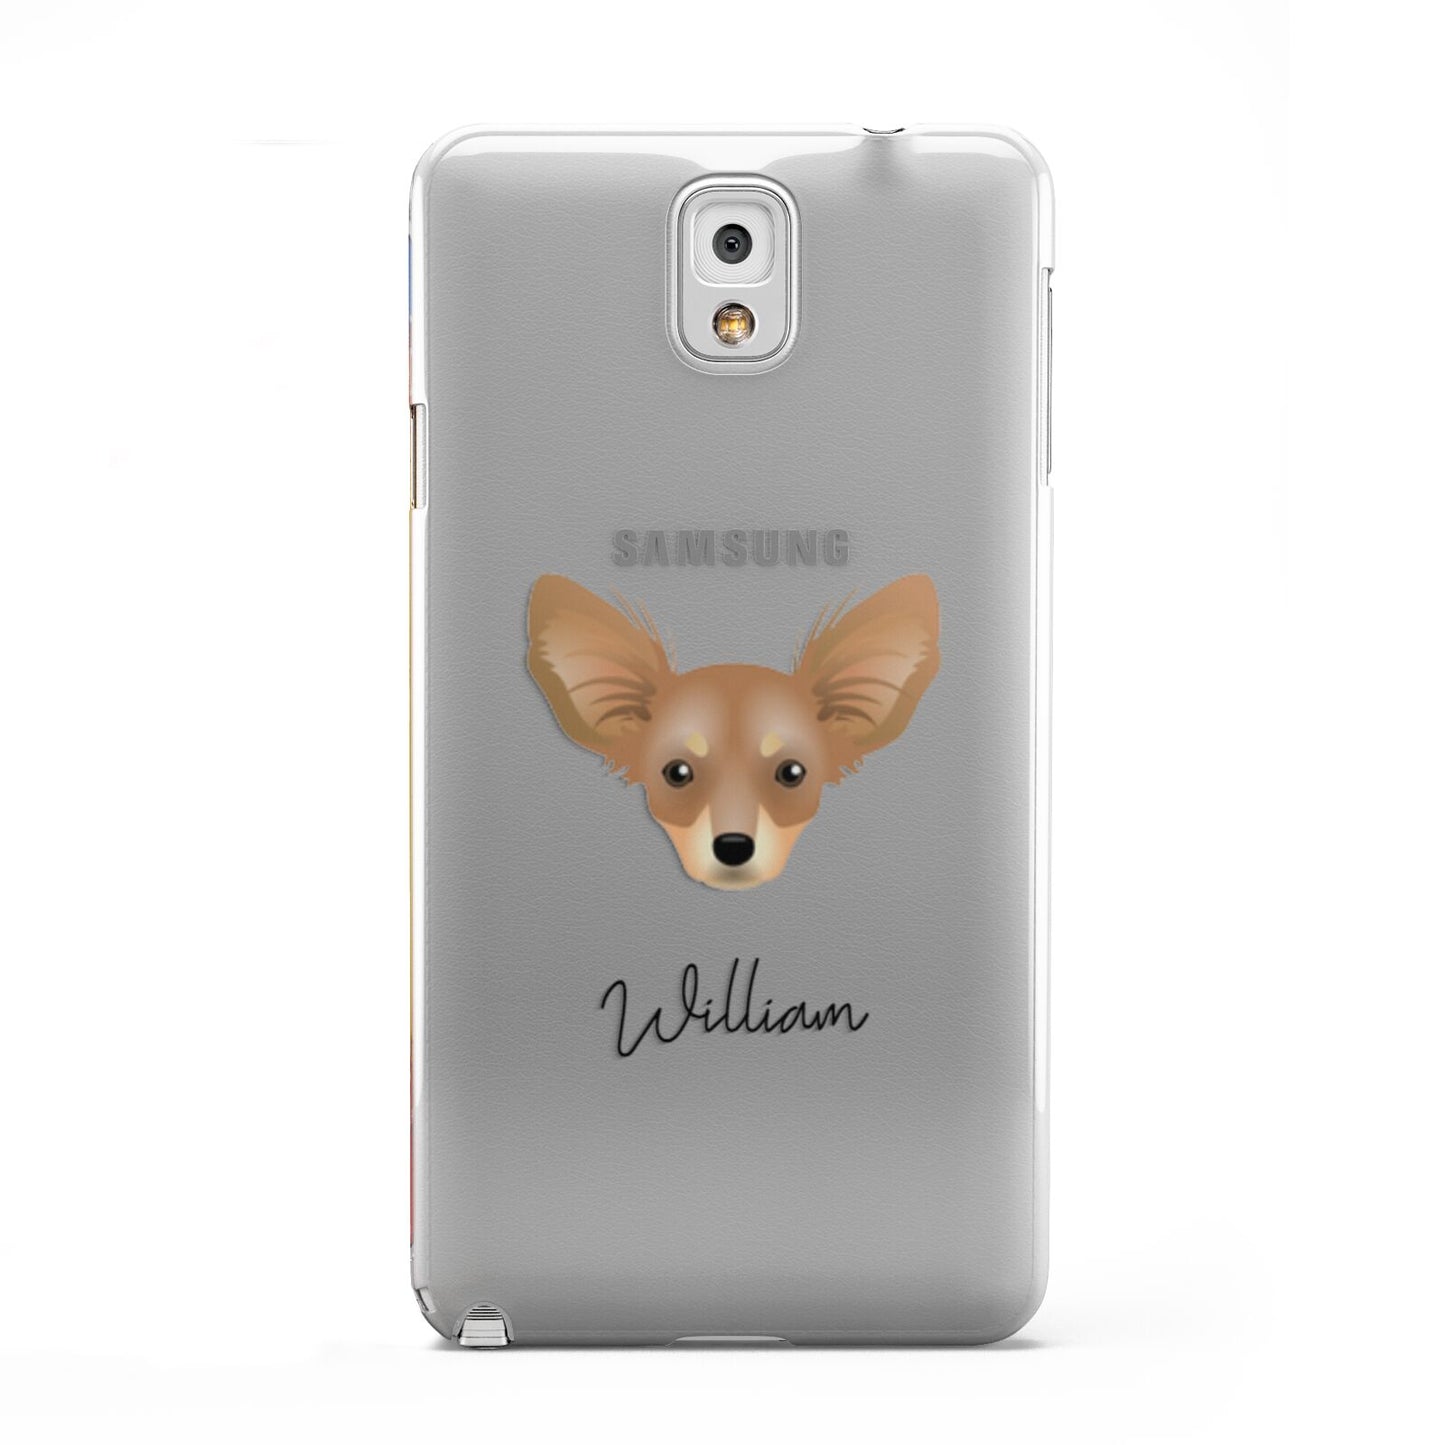 Russian Toy Personalised Samsung Galaxy Note 3 Case